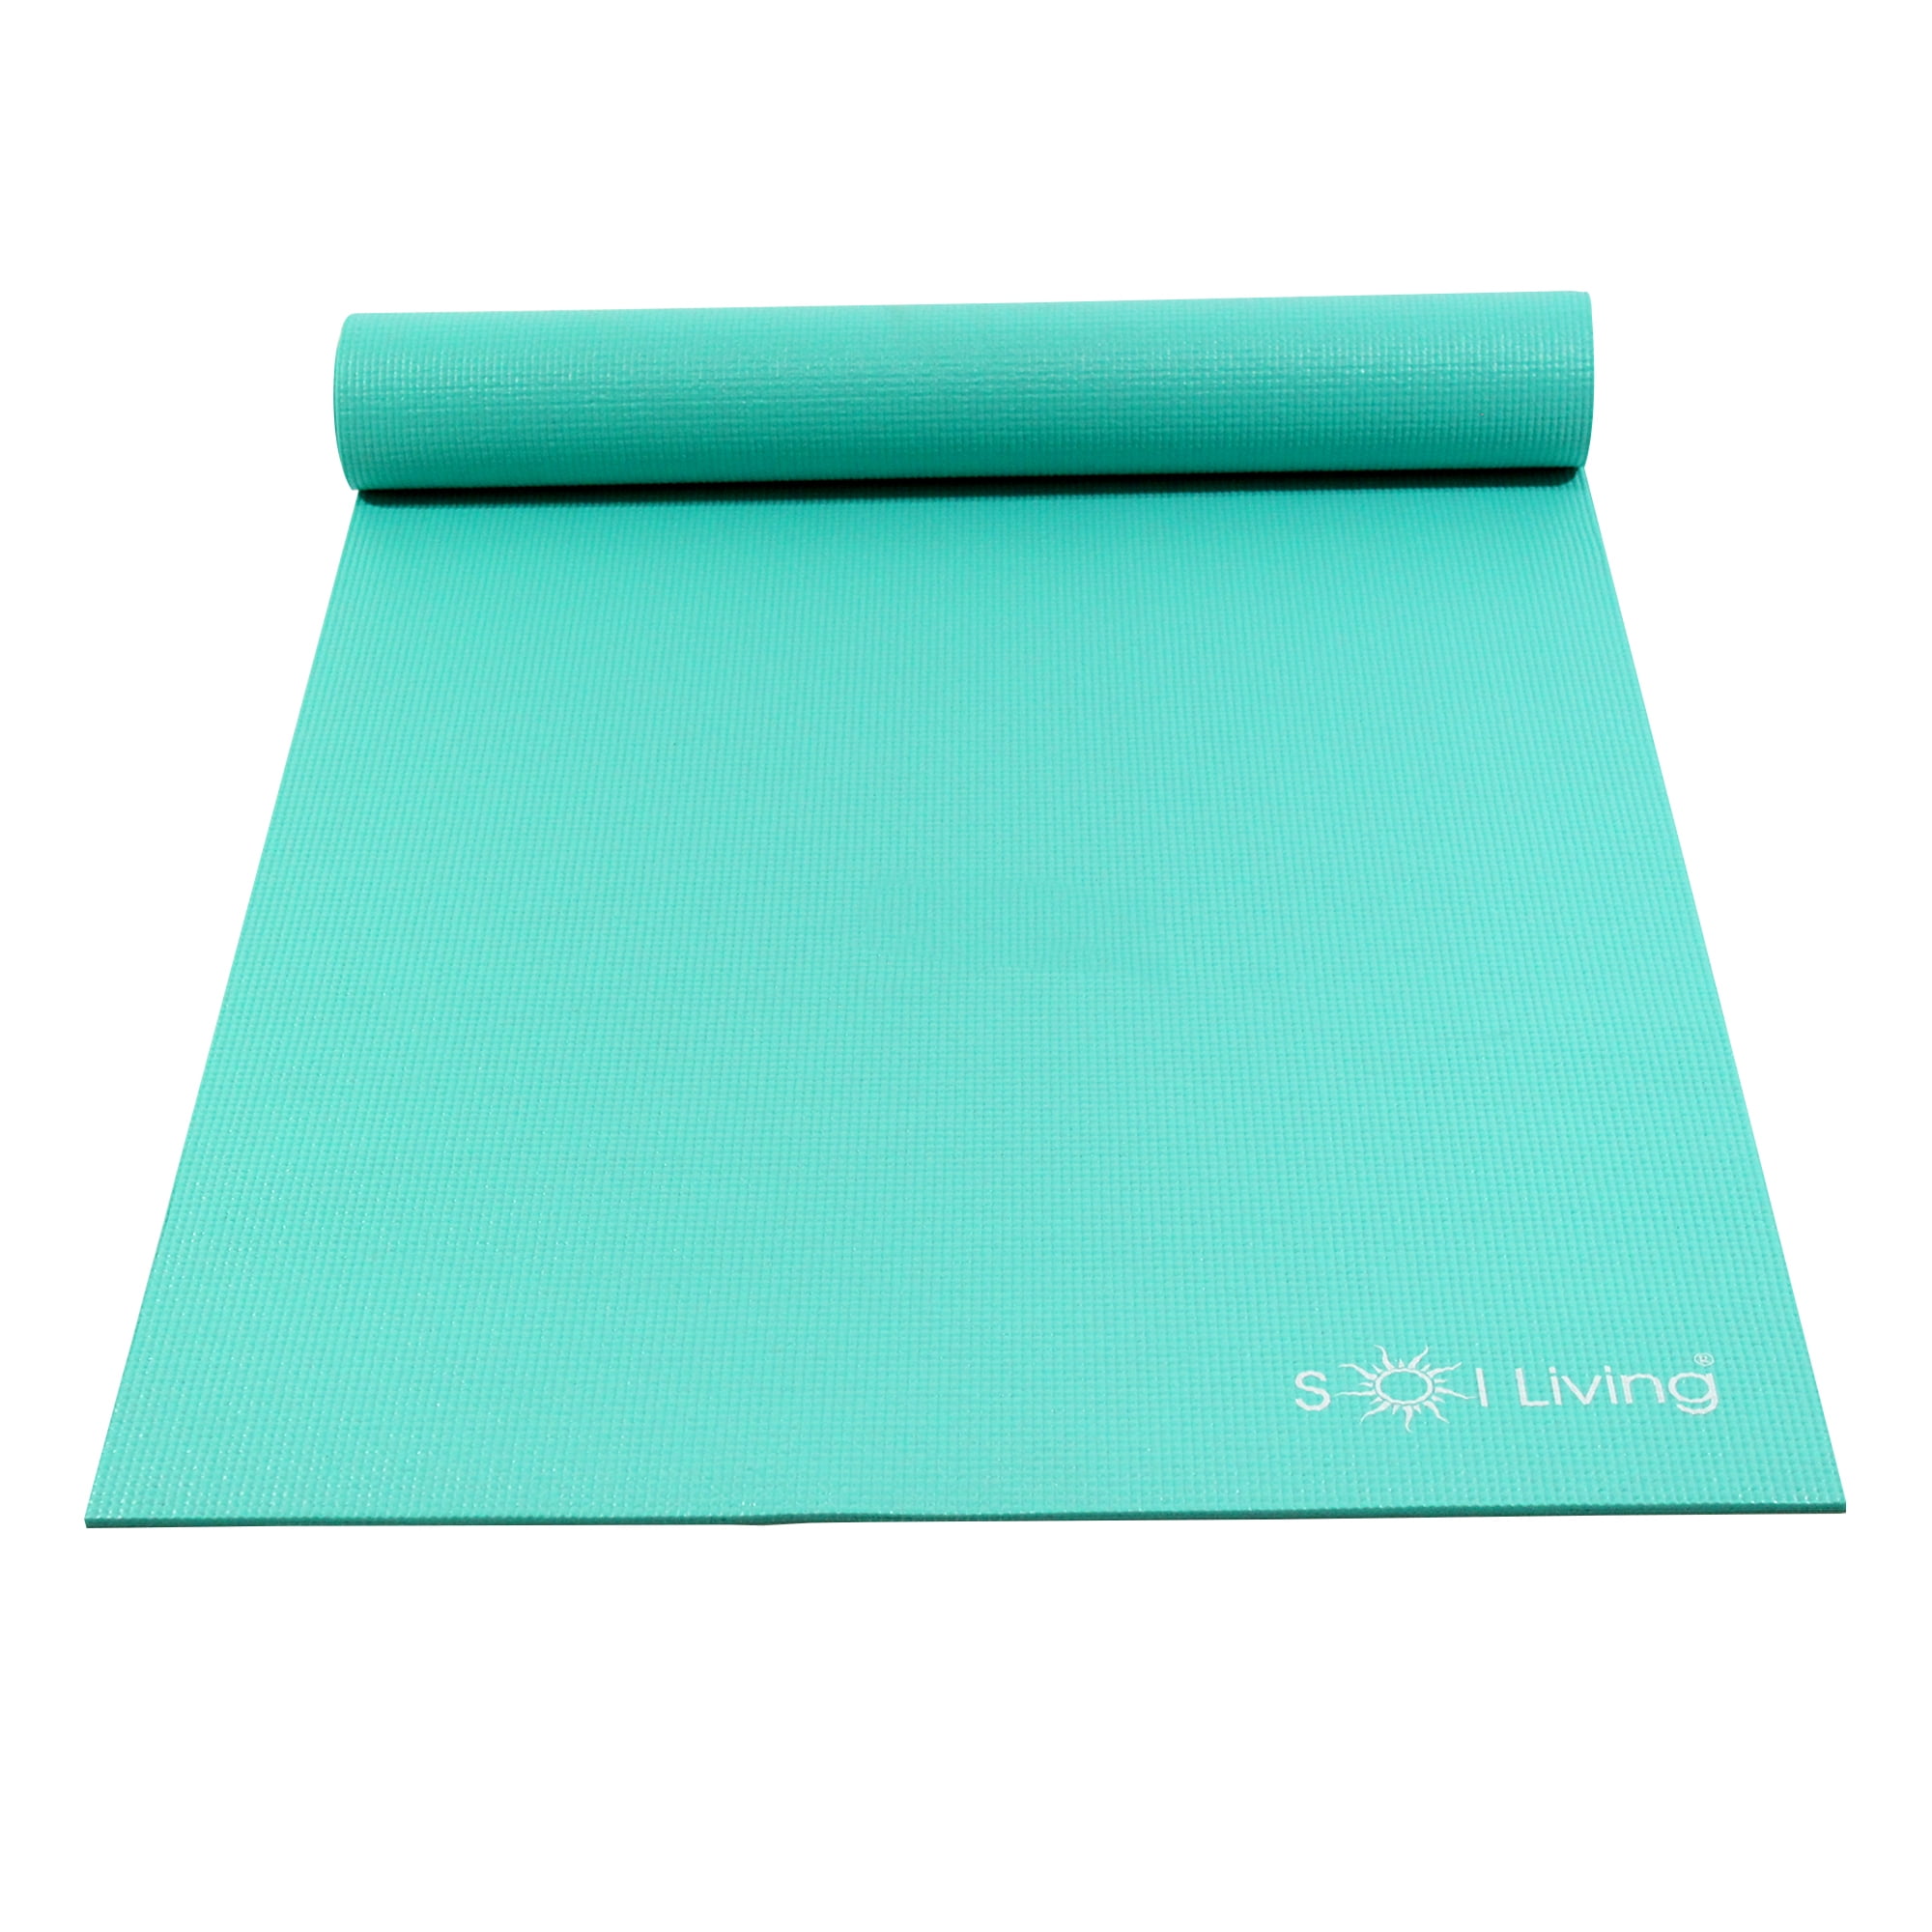 ideal yoga mat thickness